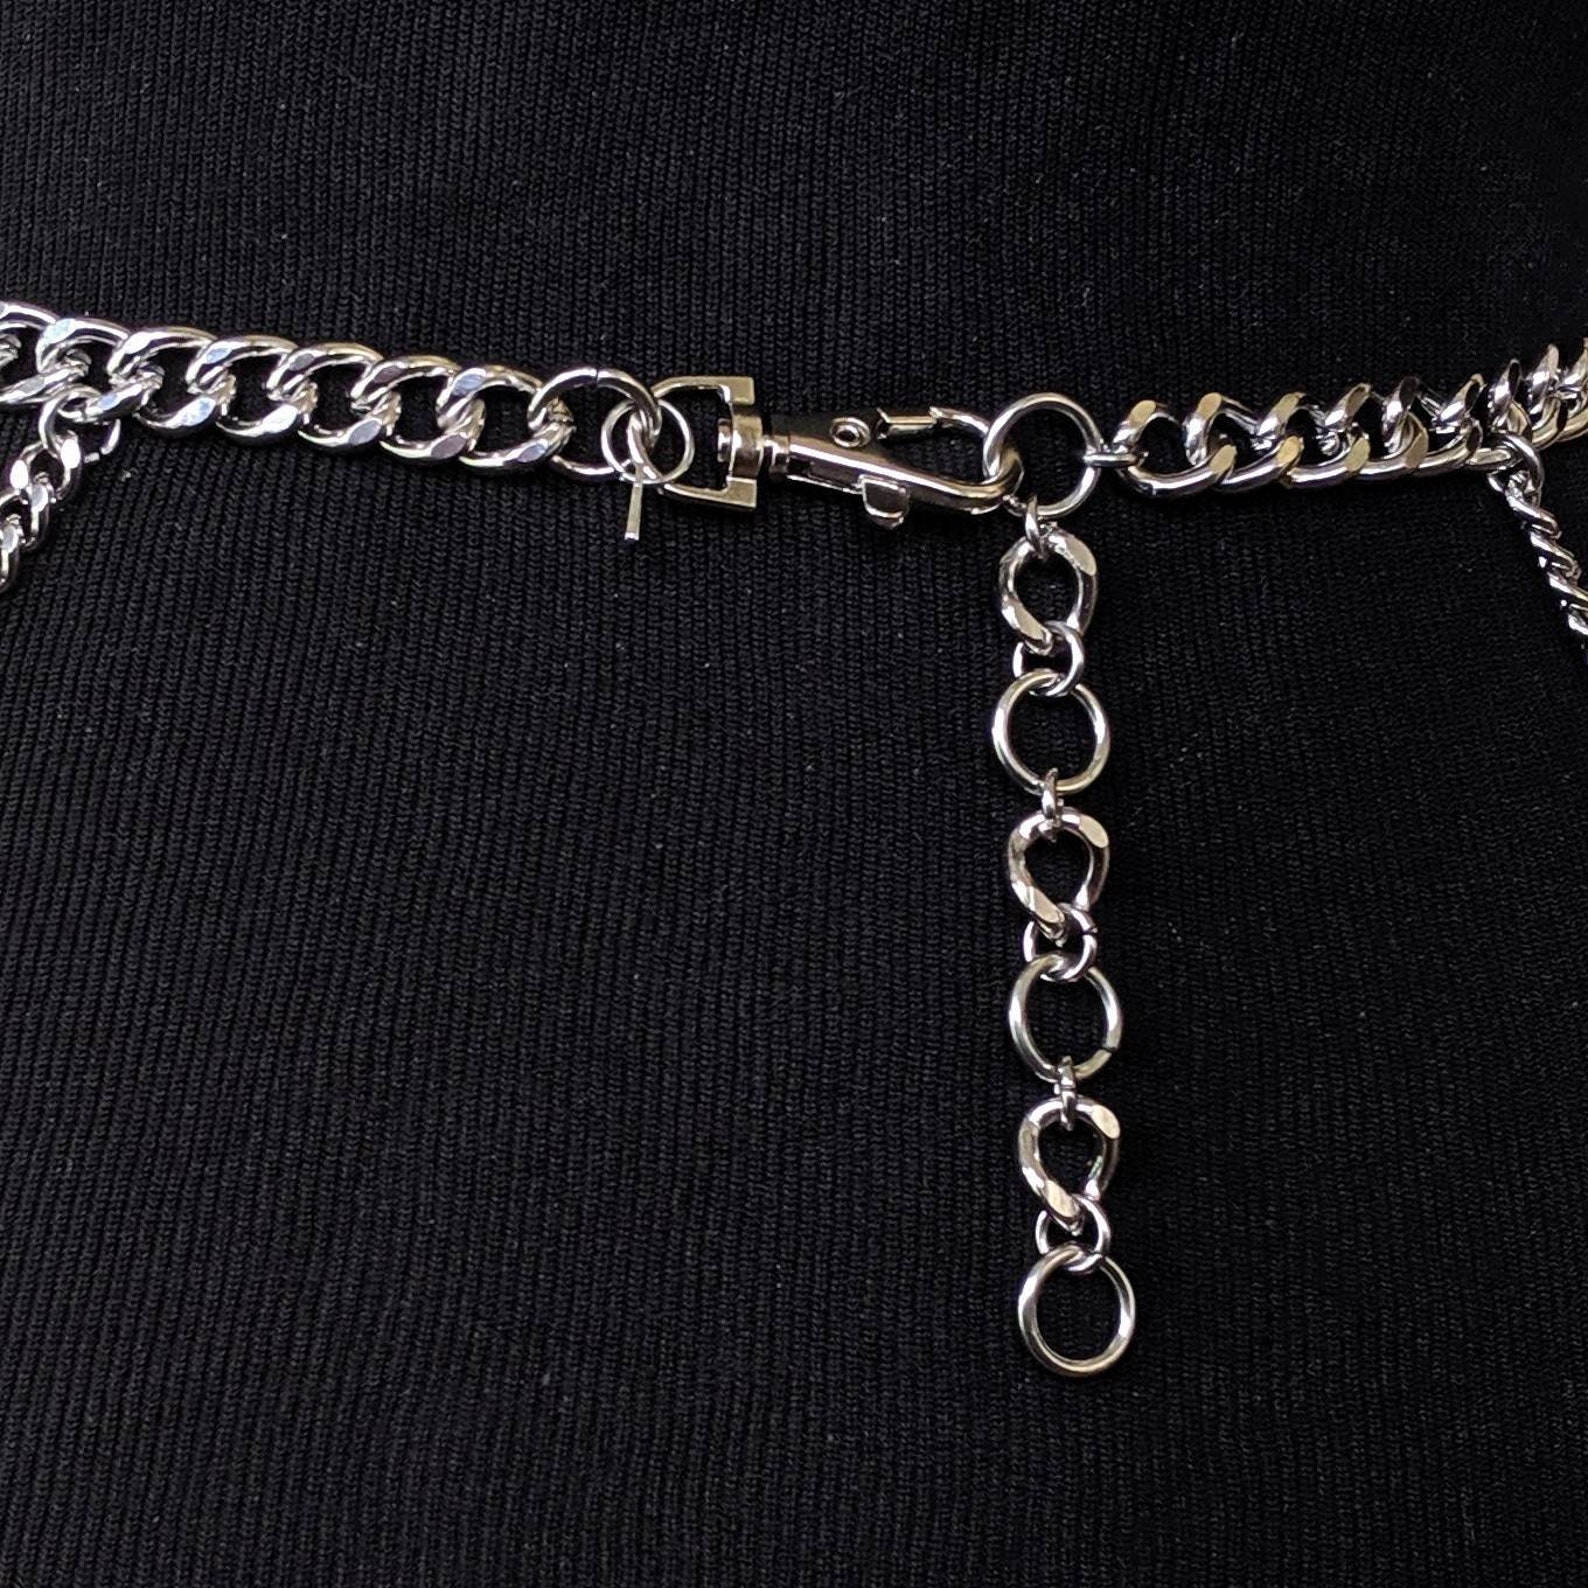 Ouroboros Belt Snake Silver Chain Adjustable Goth | Etsy